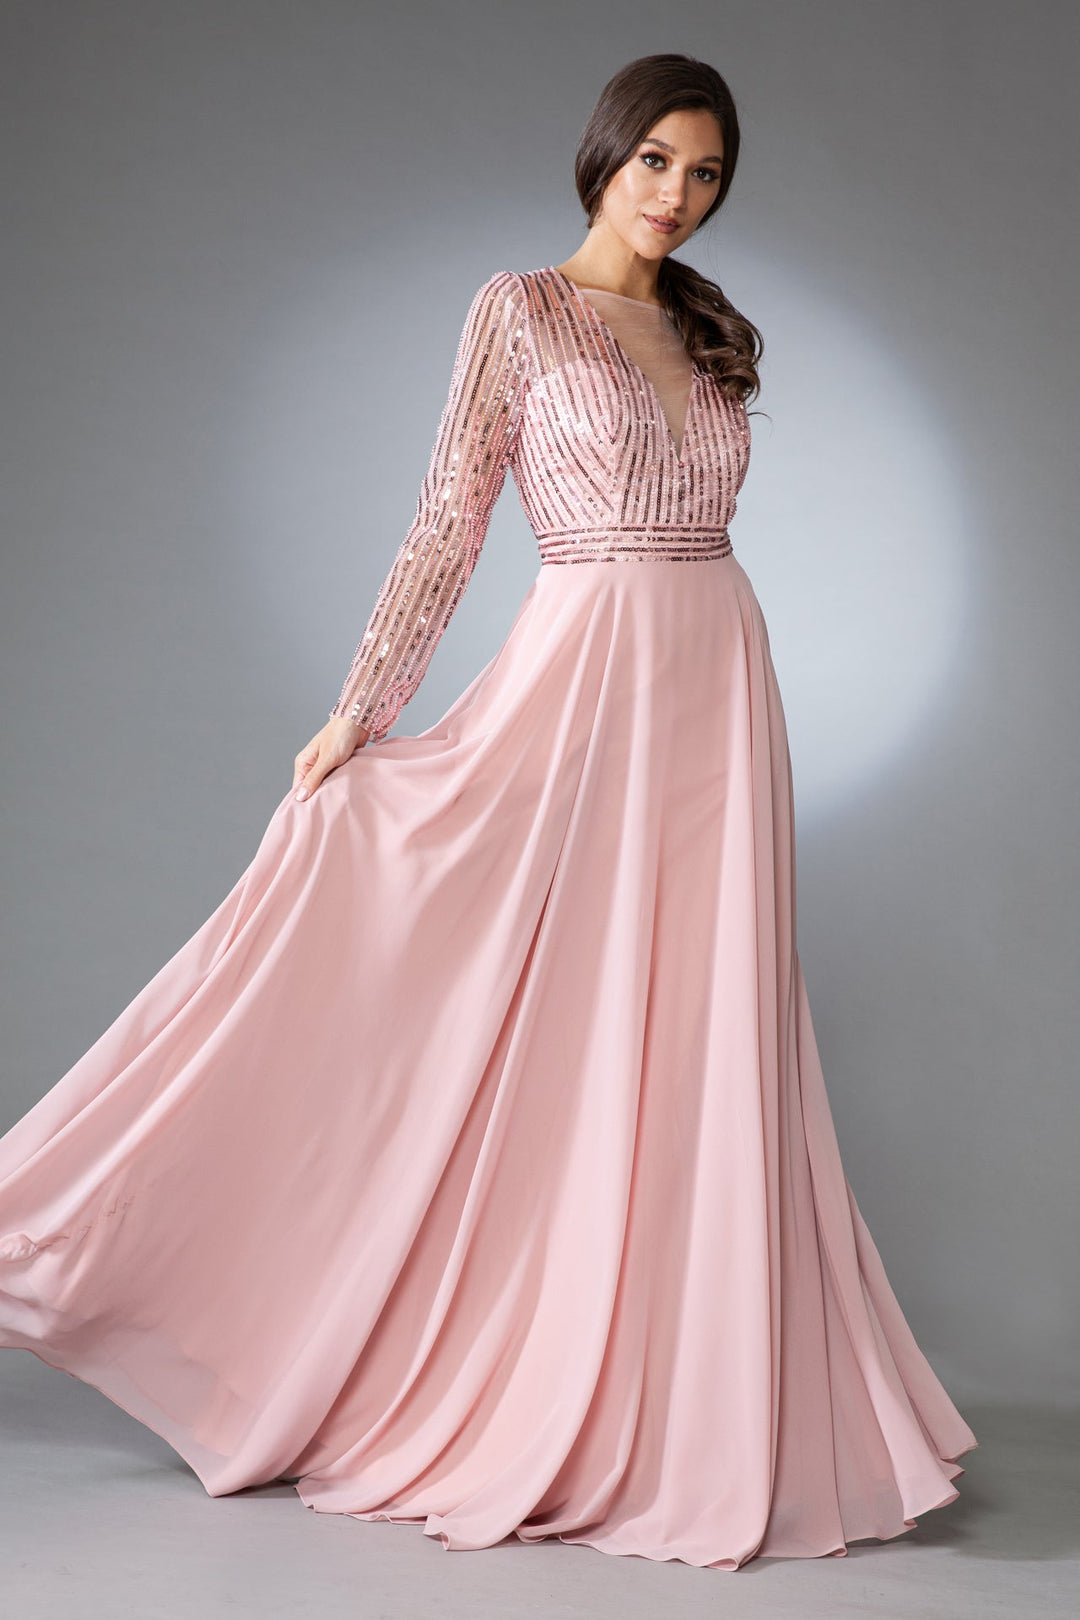 Long Sleeves A-Line Chiffon Skirt Illusion V-Neck Long Mother Of The Bride Dress AC7036-1